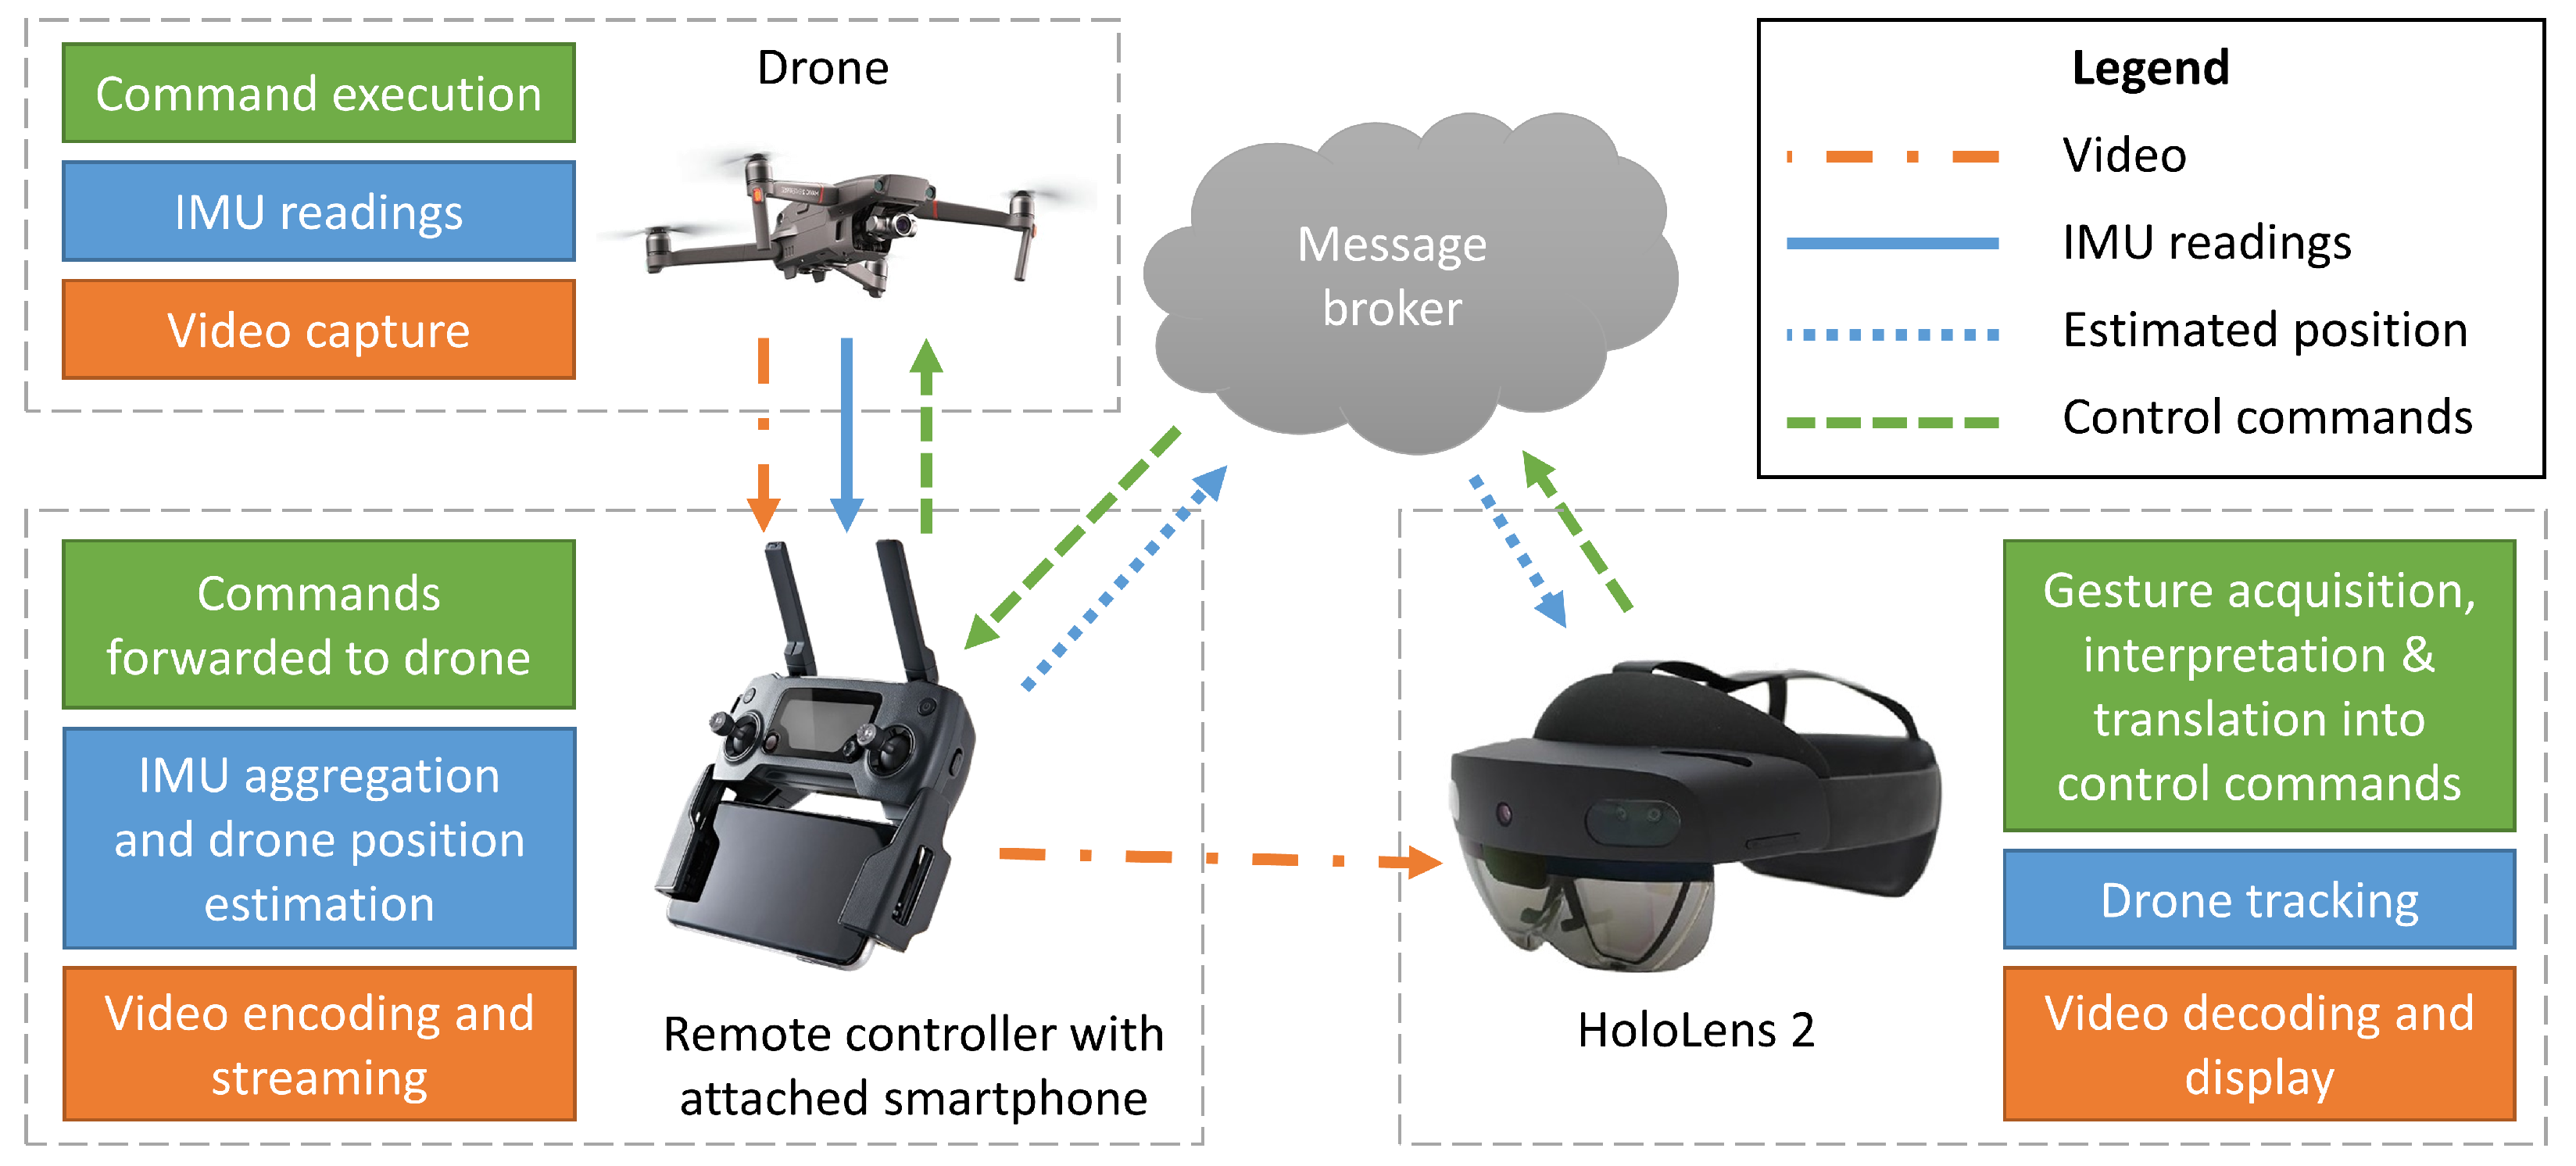 Drones Free Full-Text | Drone Control in AR: An Intuitive System for Single-Handed Gesture Control, Drone Tracking, and Camera Feed Visualization in Reality